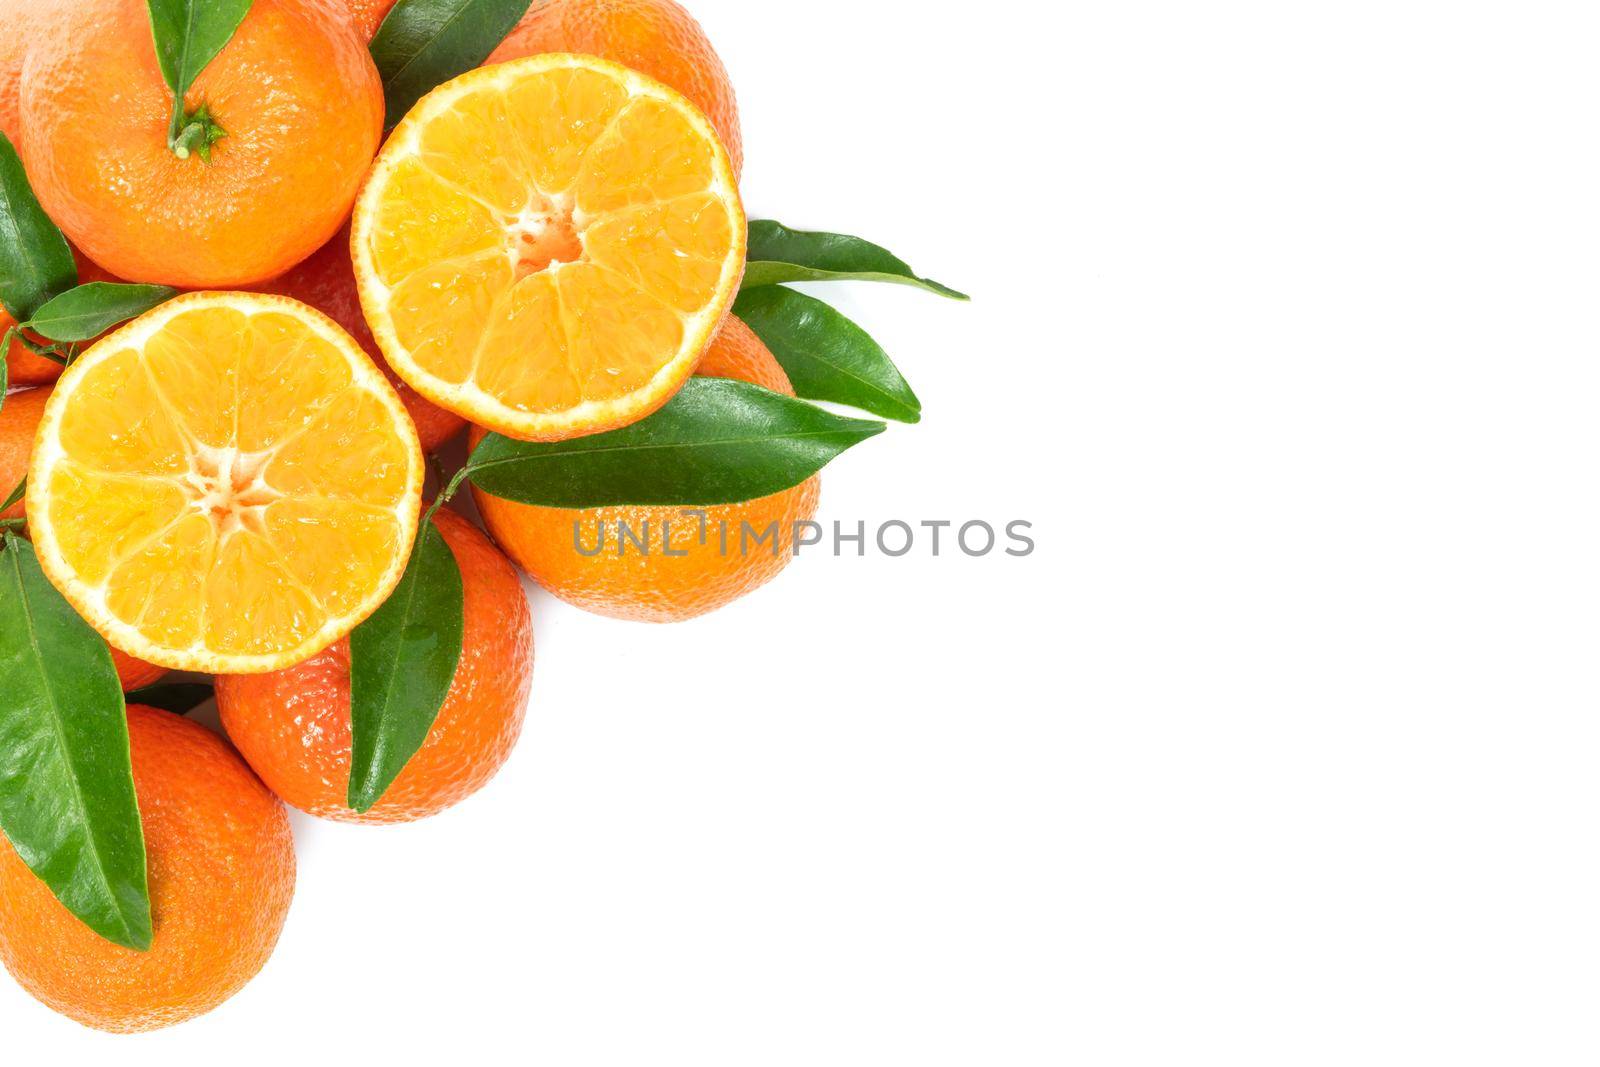 Tropical fruit composition - group of fresh oranges or tangerines  isolated on a white background with copy space